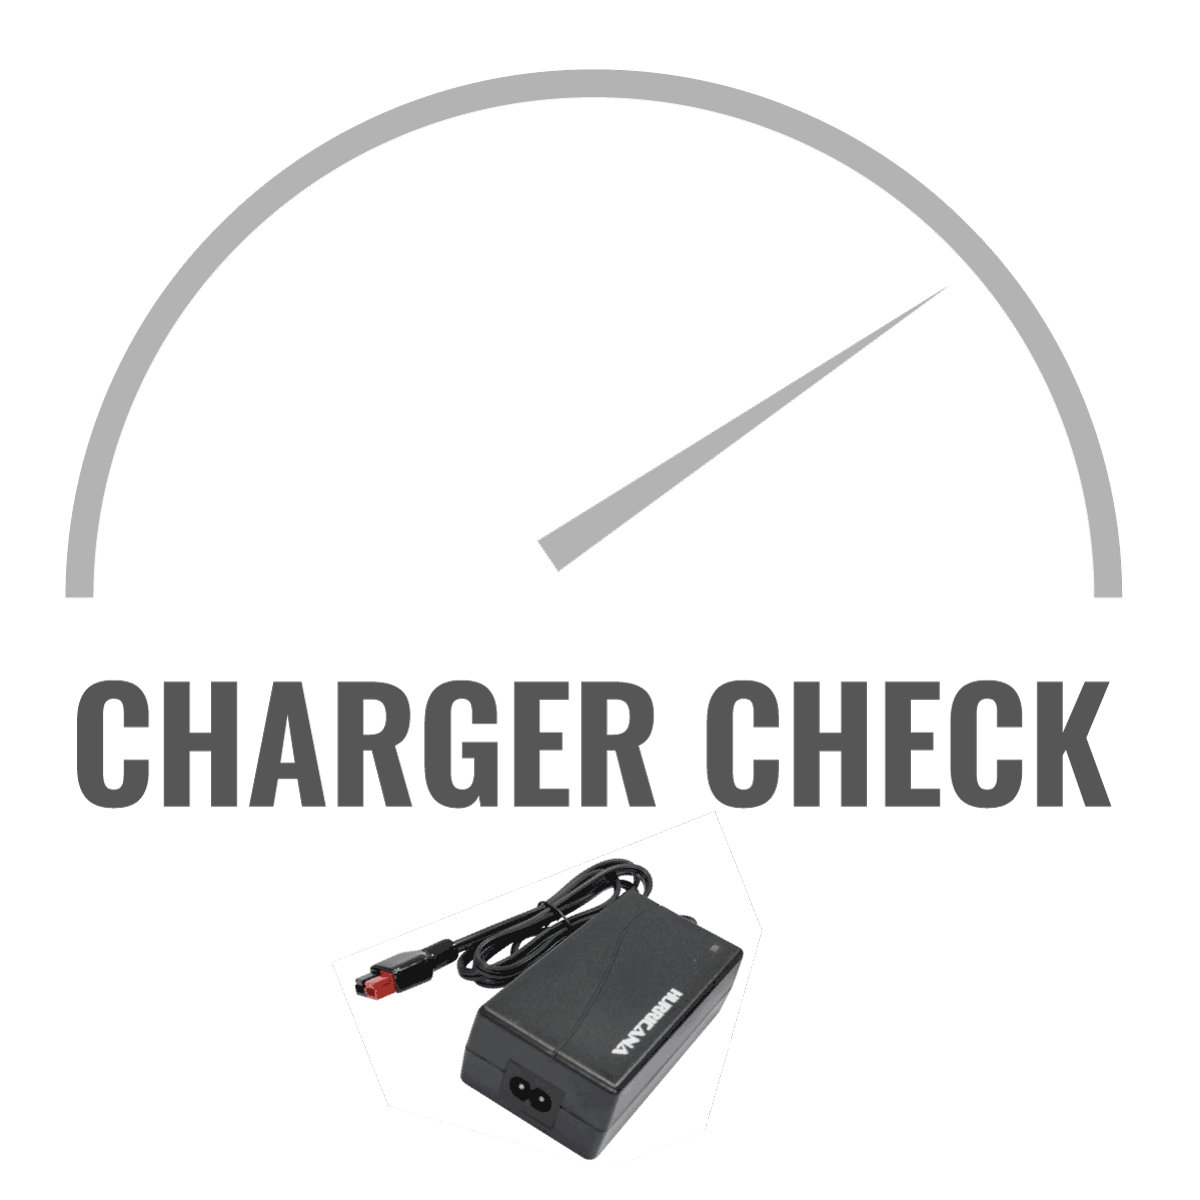 Charger Check Service